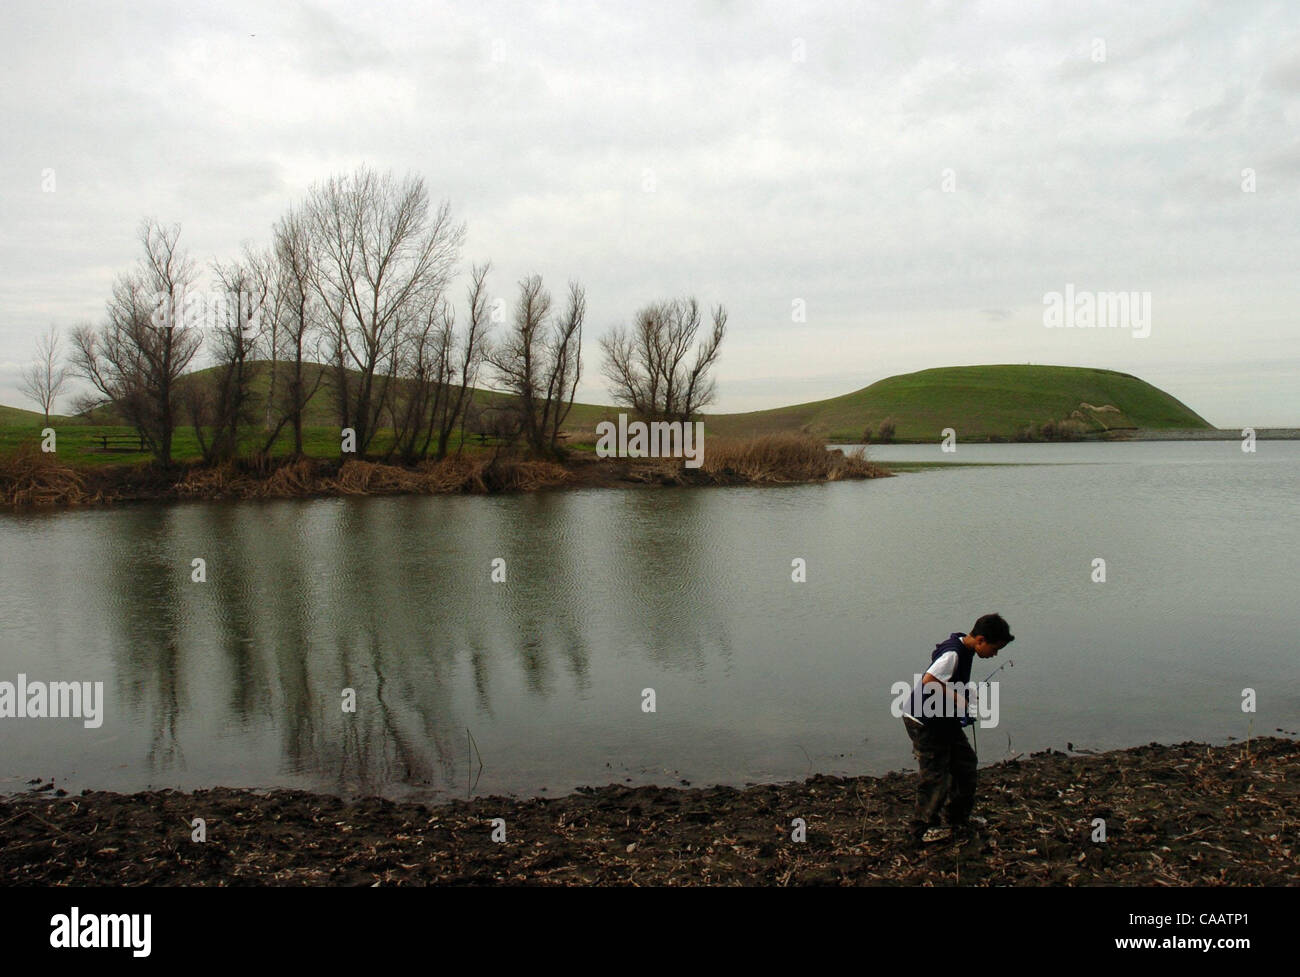 Dayton Fonseca III, 10, of Antioch, walks away from Contra Loma Reservoir after fishing in Antioch, Calif., on Thursday, February 19, 2004. The Contra Costa Water District is studying the possibility of raising the water level at the reservoir. Parks district officials express concern that doing so  Stock Photo